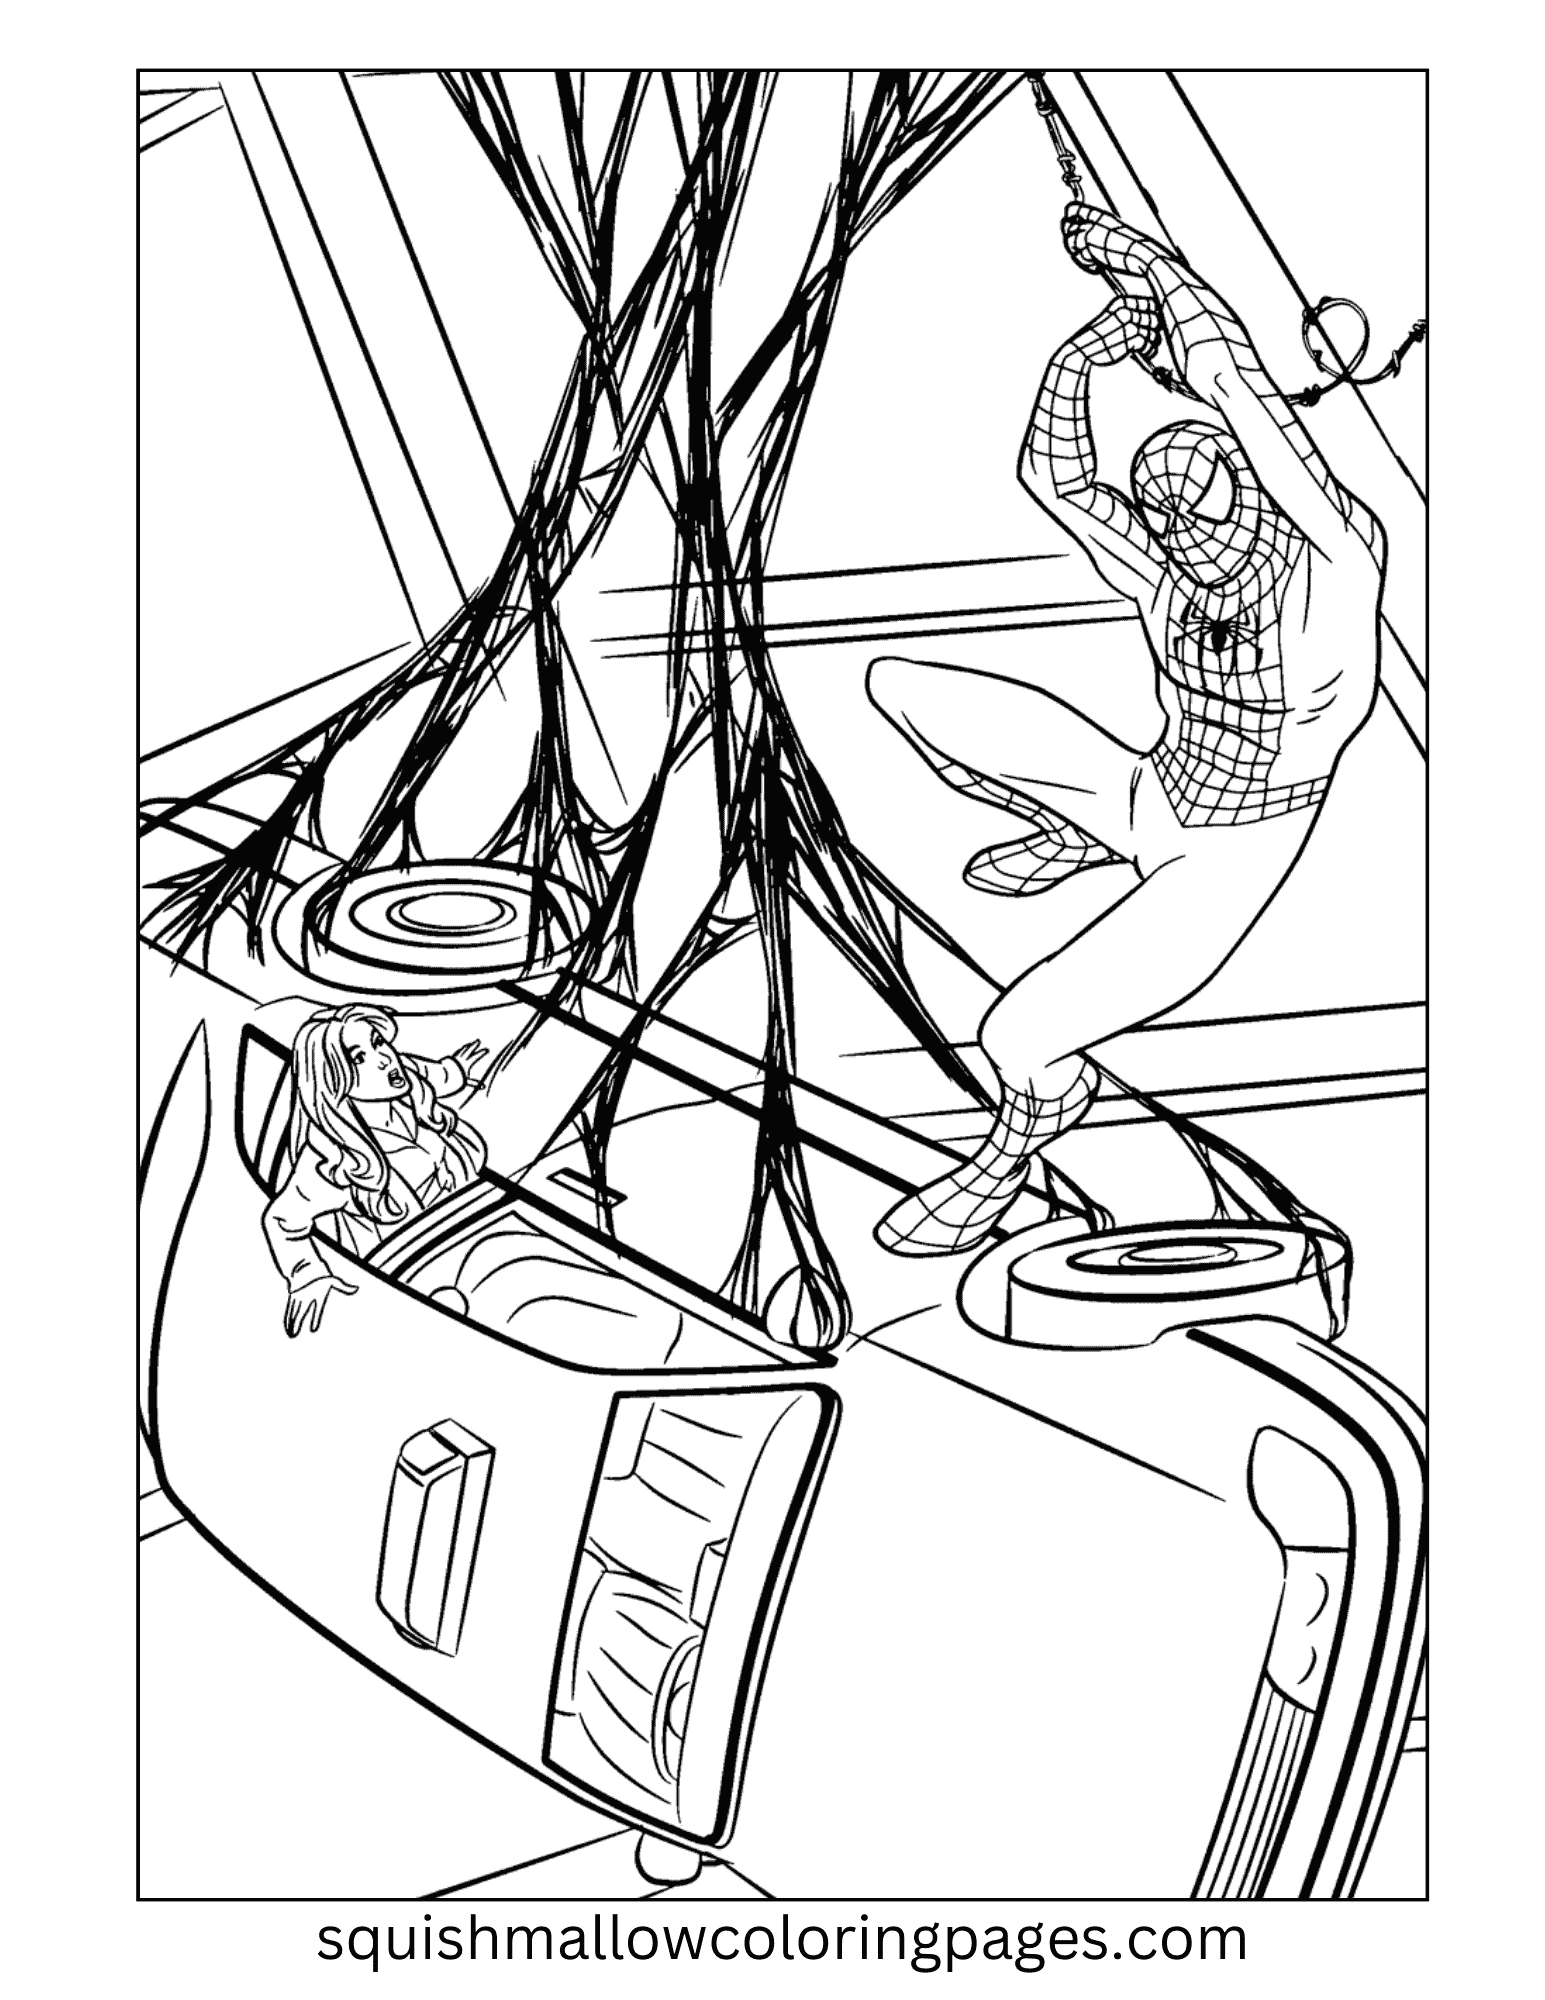 Hold Car Spiderman coloring pages